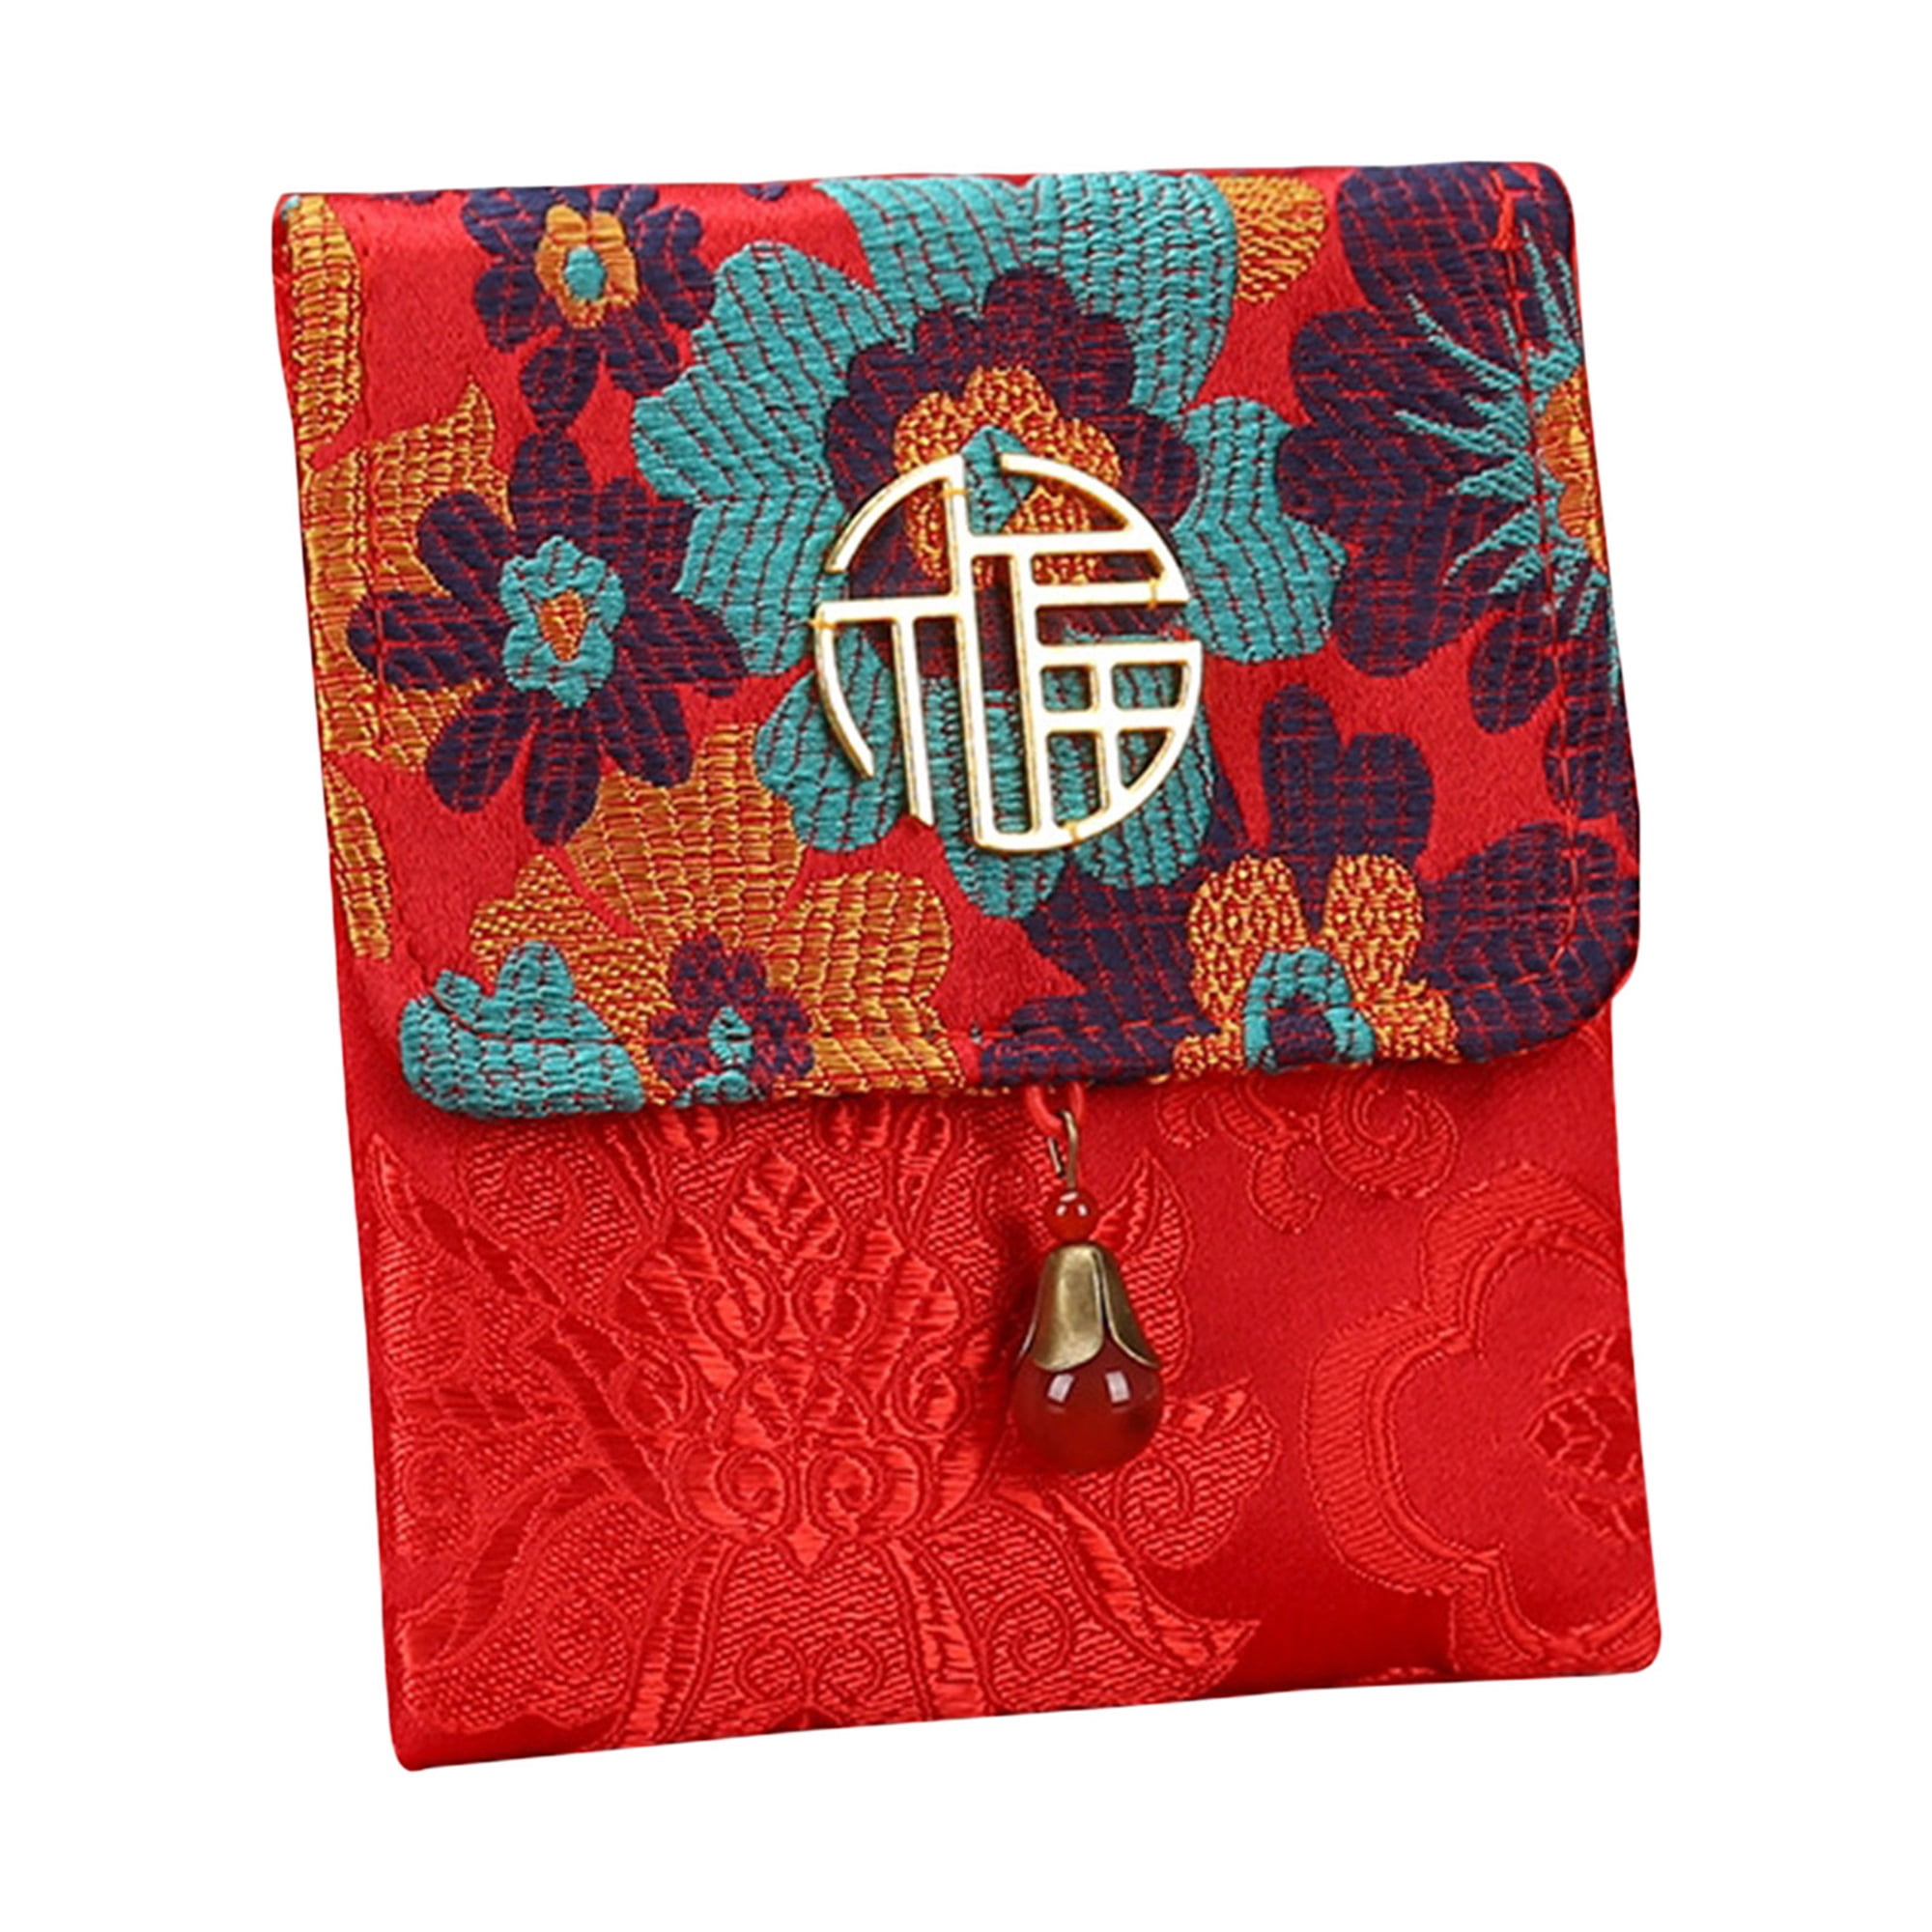 Chinese New Year Red Envelopes,Folding Fan Chinese Red Envelope Lucky Money  Envelopes Blessing Bags for Lunar New Year 